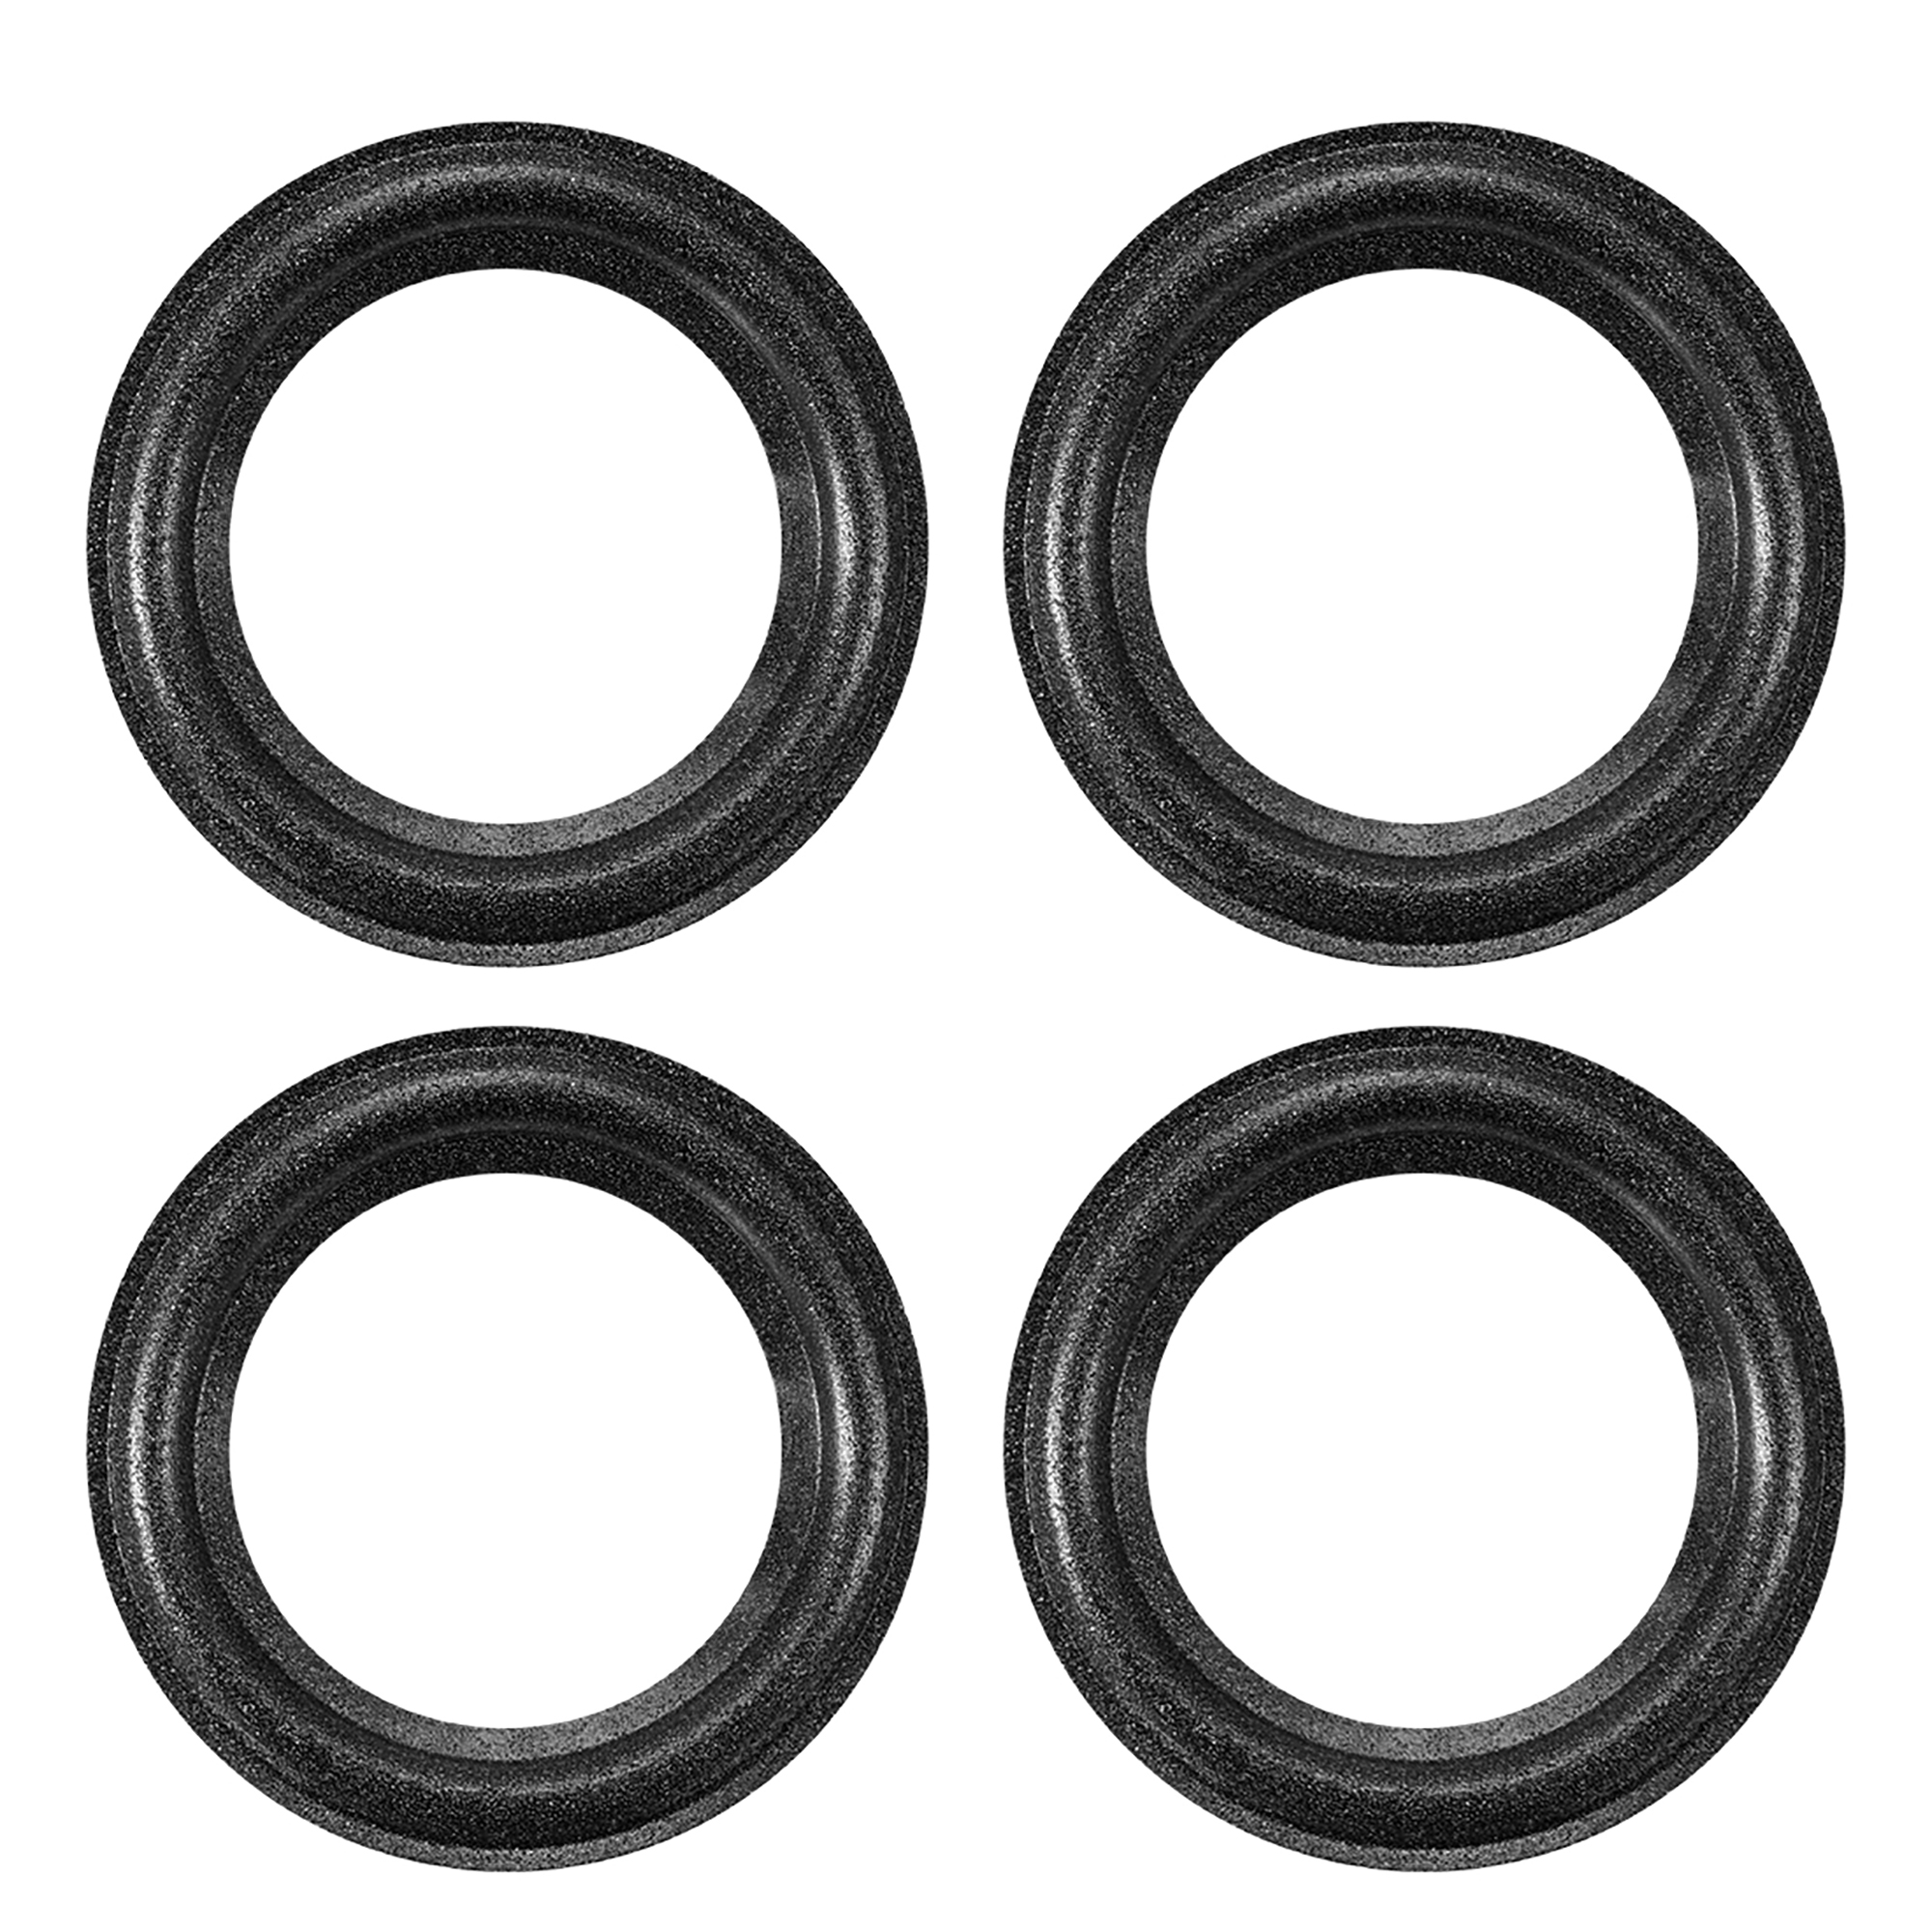 Fielect 10inch//250mm Speaker Rubber Edge Surround Rings Replacement Part for Speaker Repair or DIY 4pcs